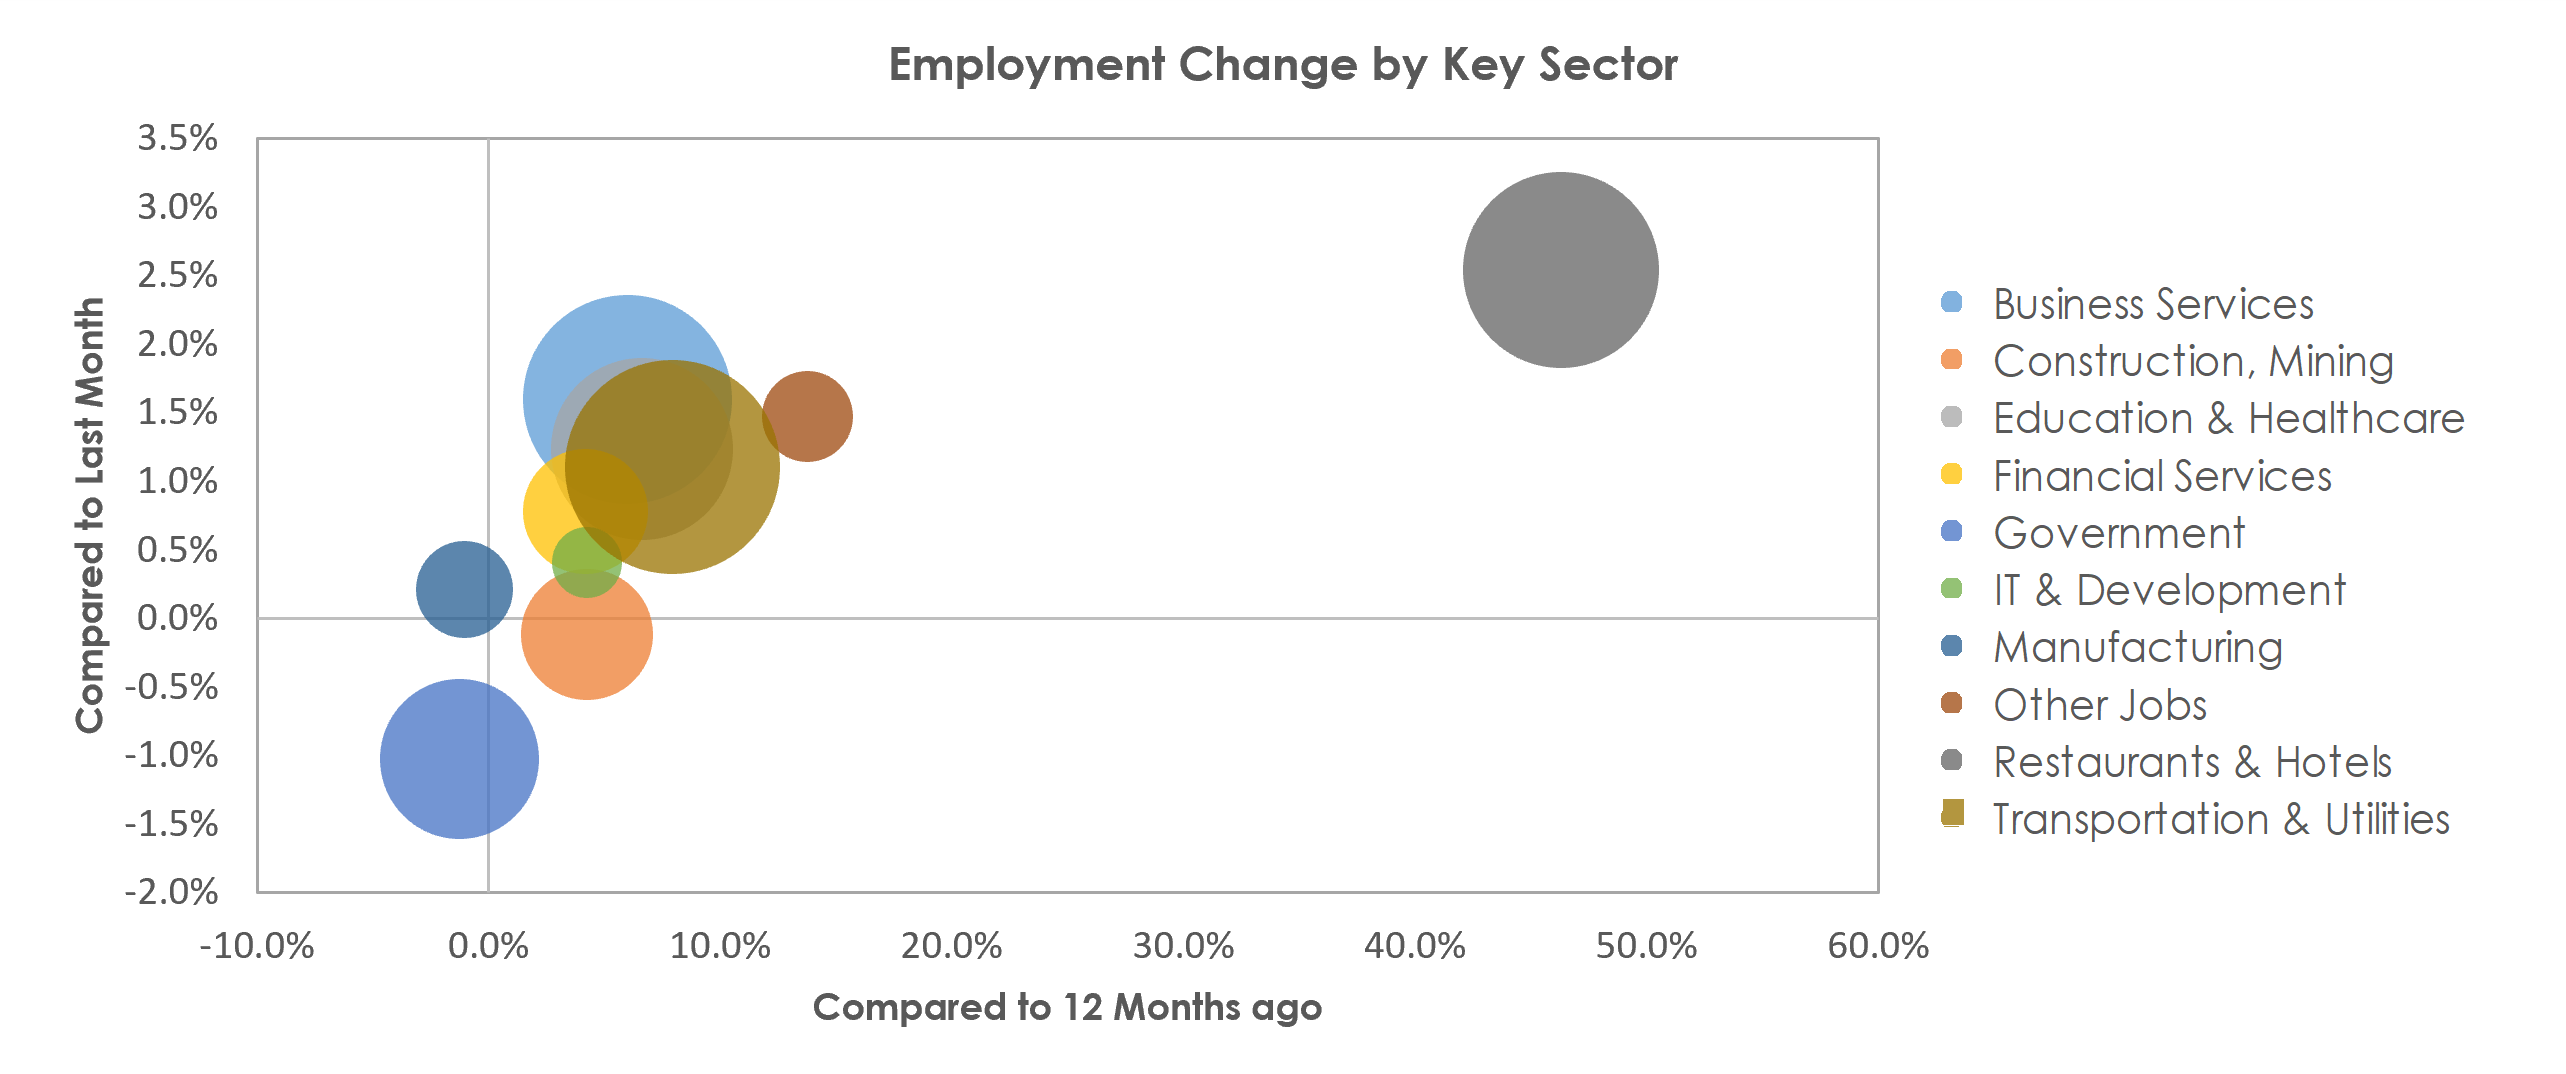 Orlando-Kissimmee-Sanford, FL Unemployment by Industry May 2021